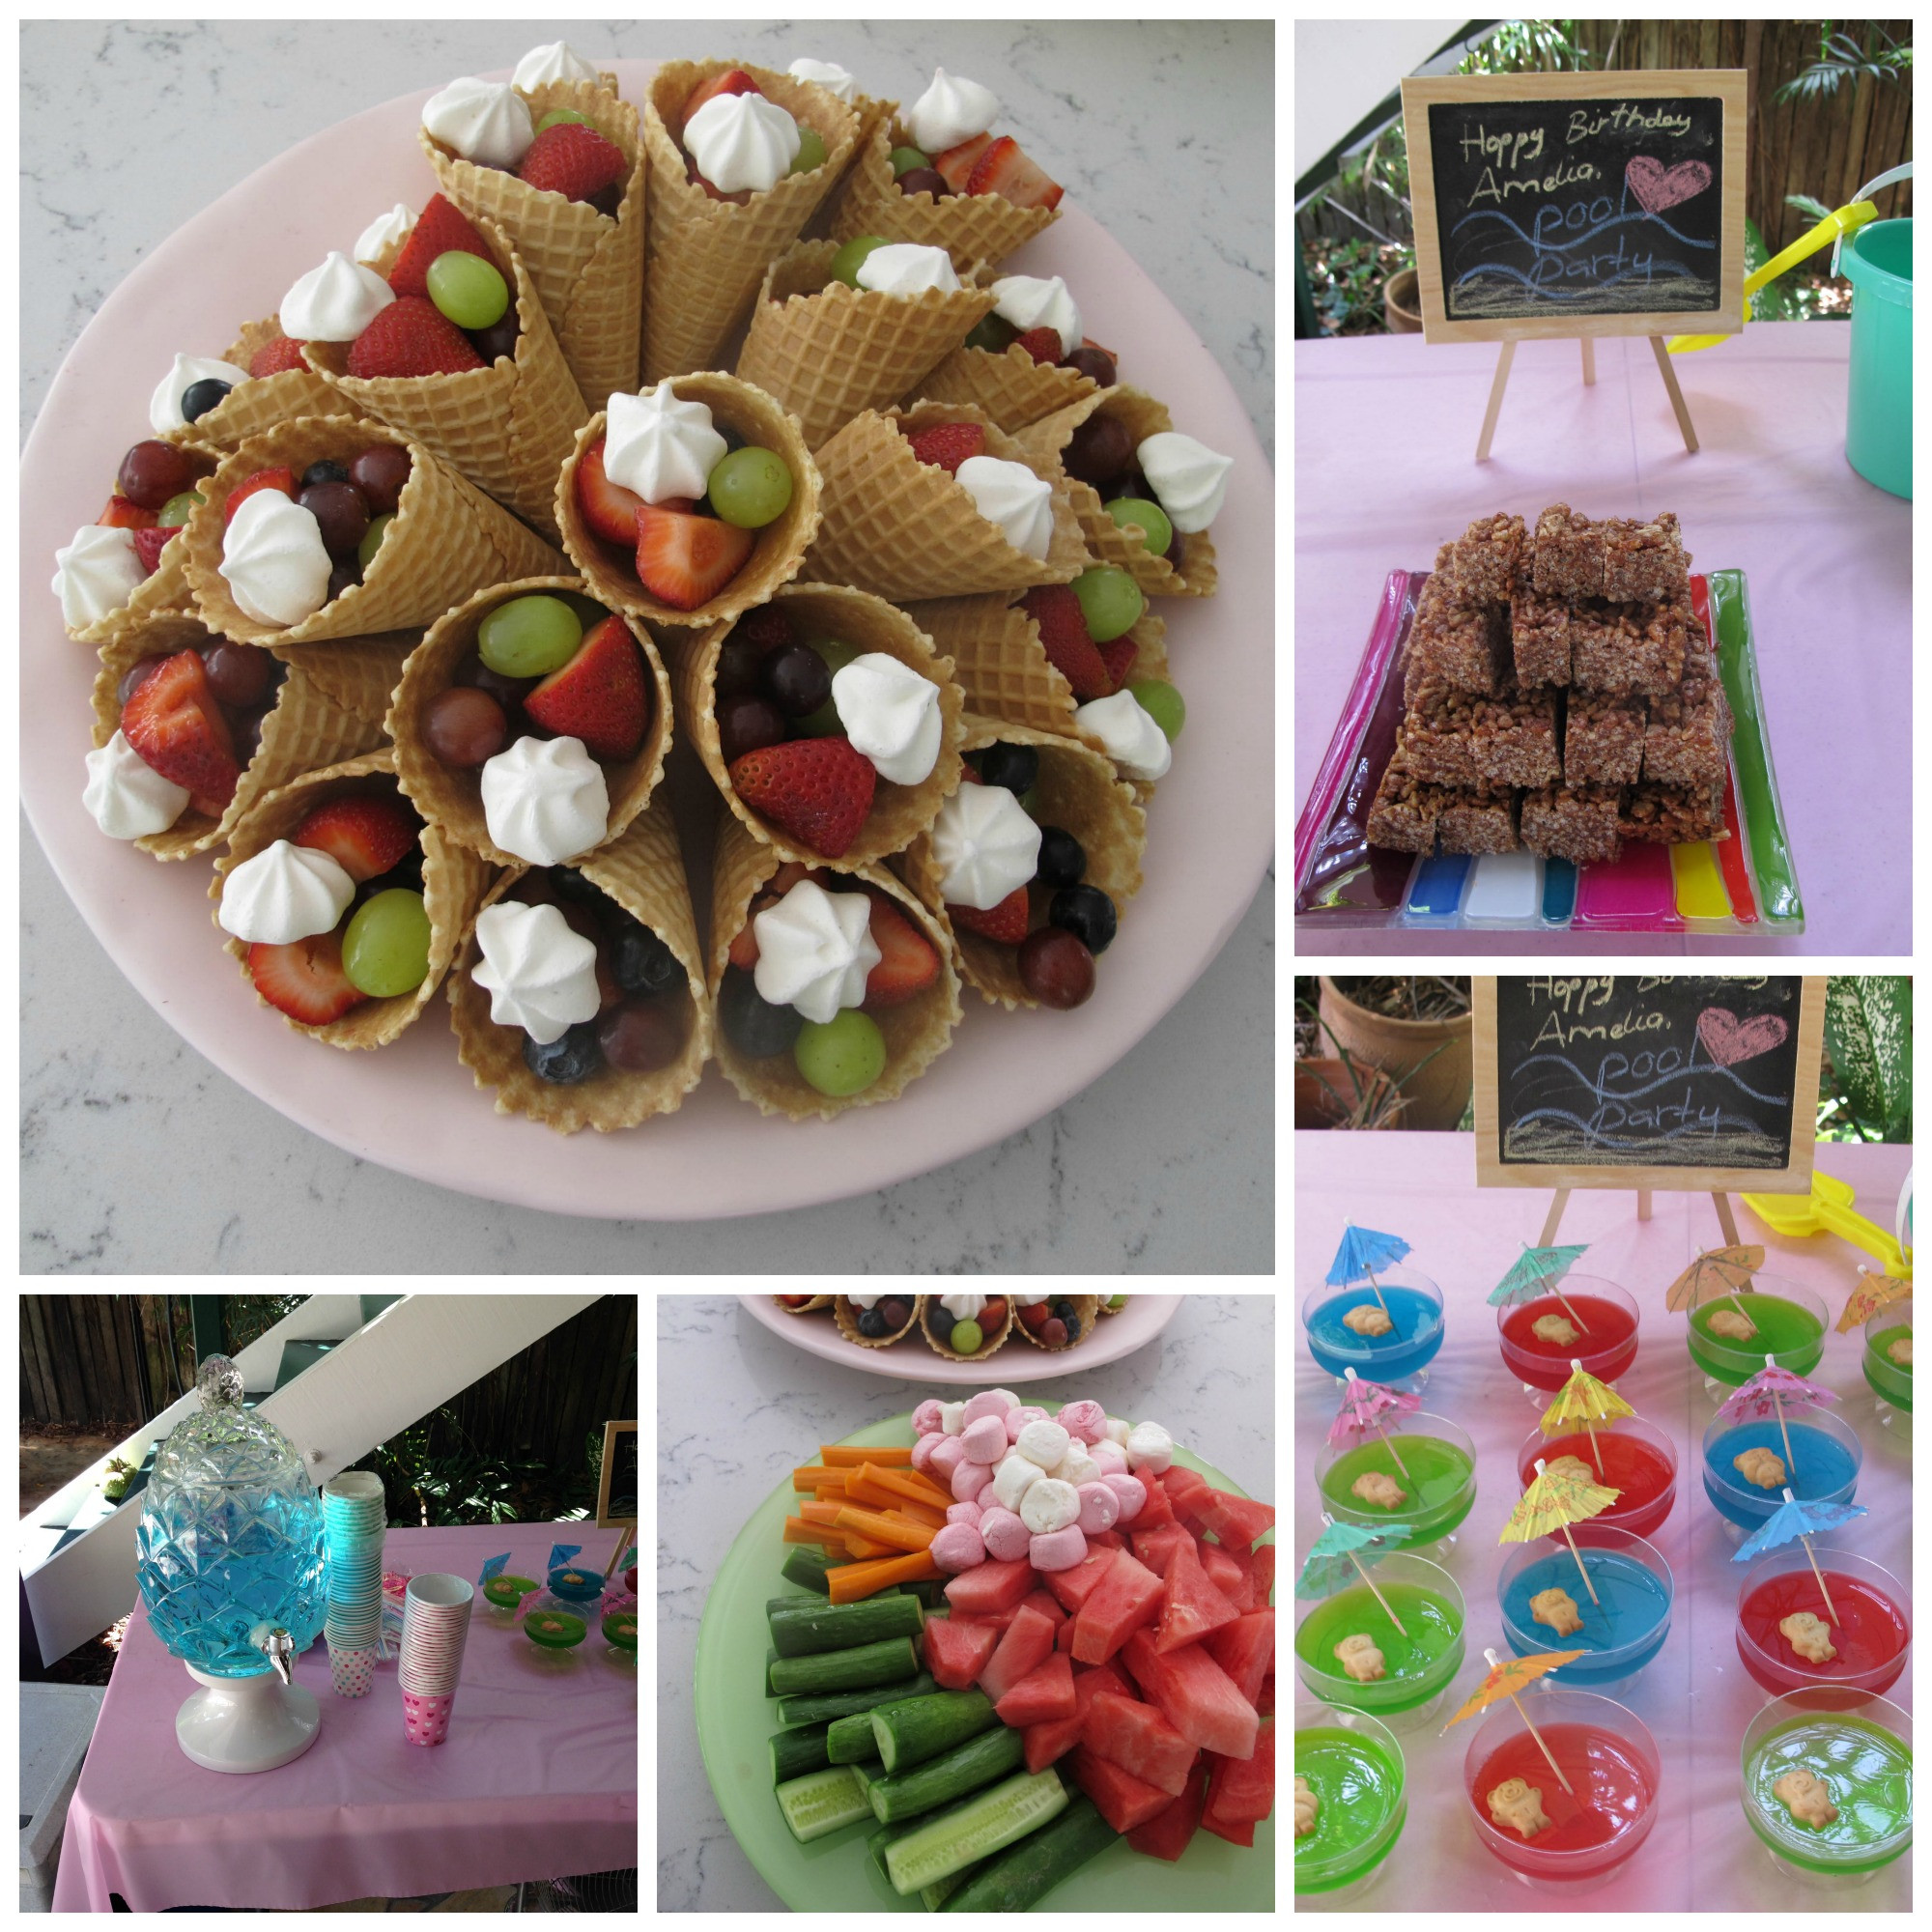 Pool Party Snack Ideas
 Birthday Pool Party Tips Tricks and Cake hint have